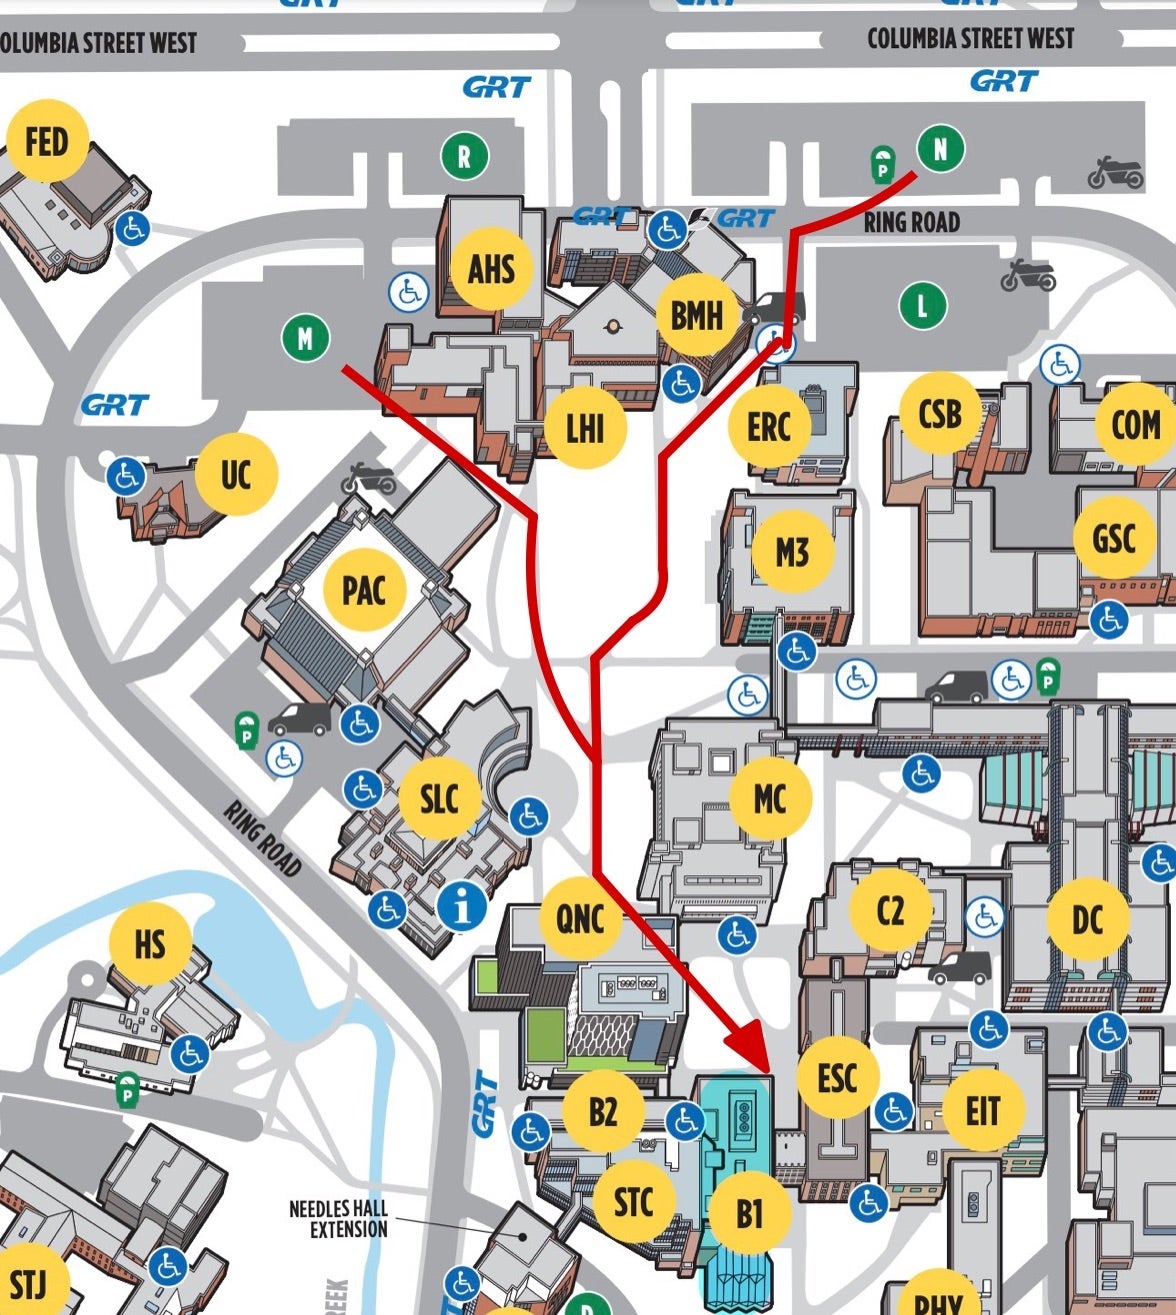 Campus map: directions from public parking to B1